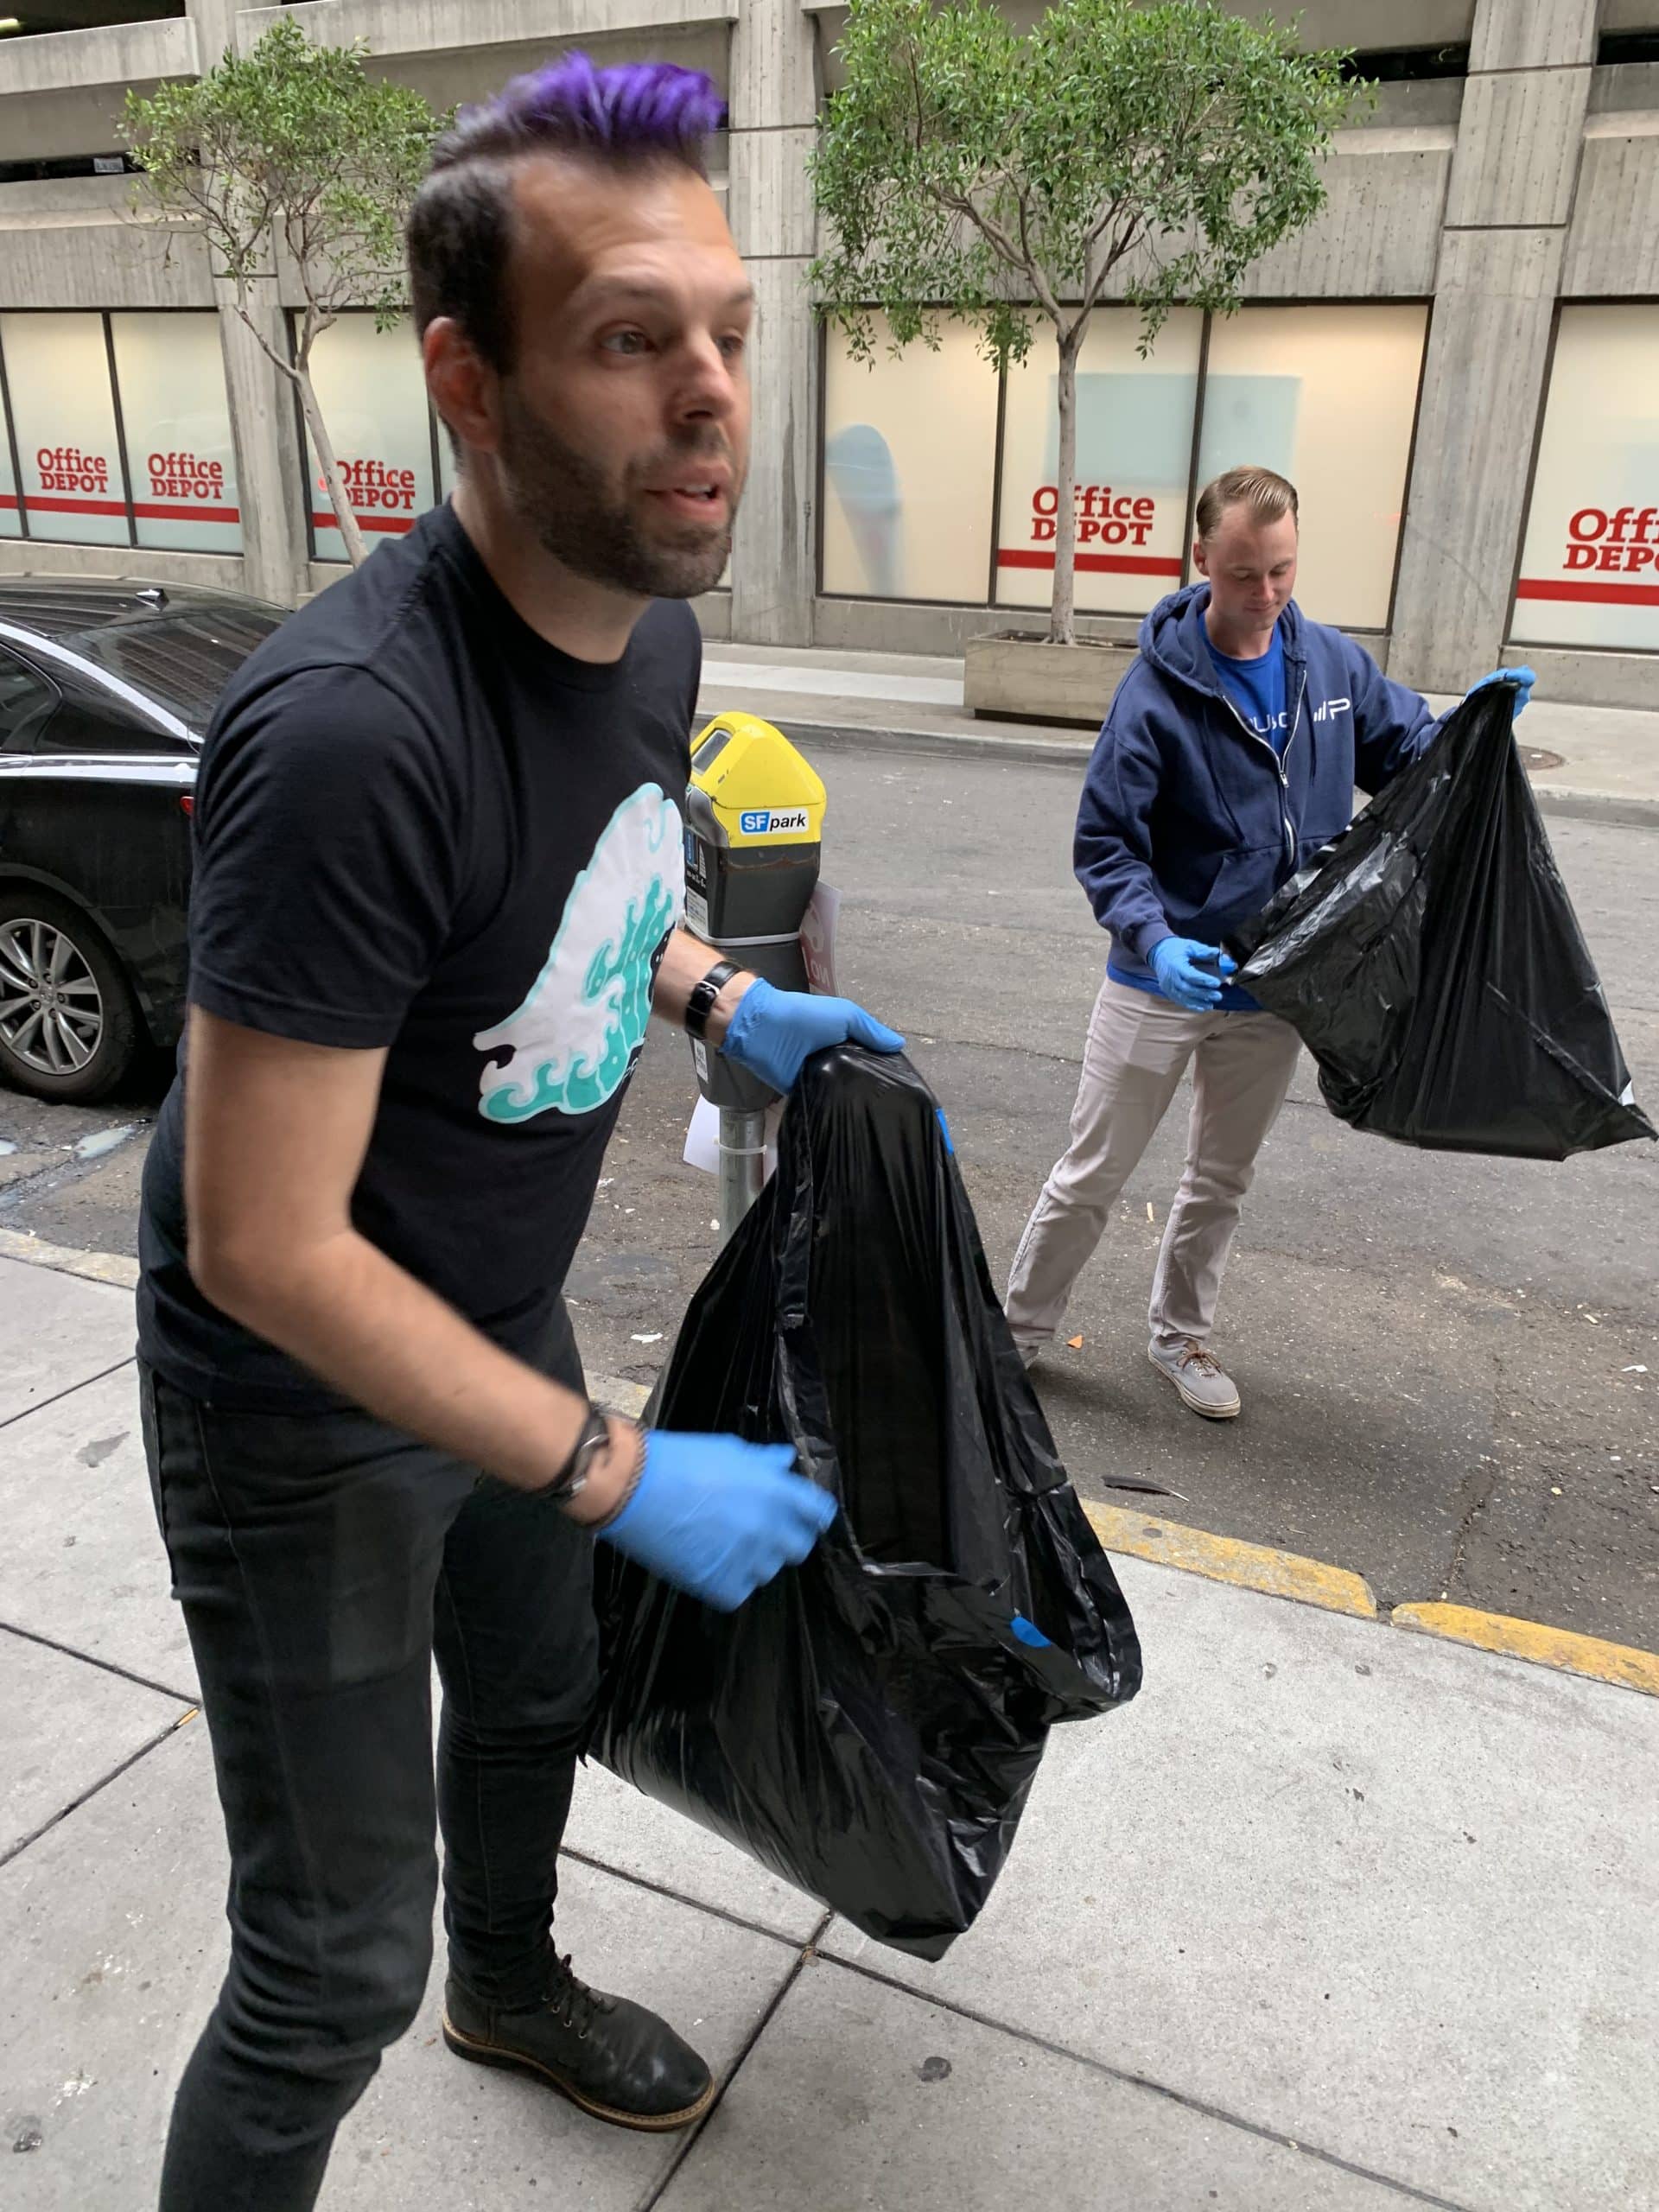 Paubox Community Service: Street Cleanup Around Our New Office - Justin Babb, Evan Fitzgerald